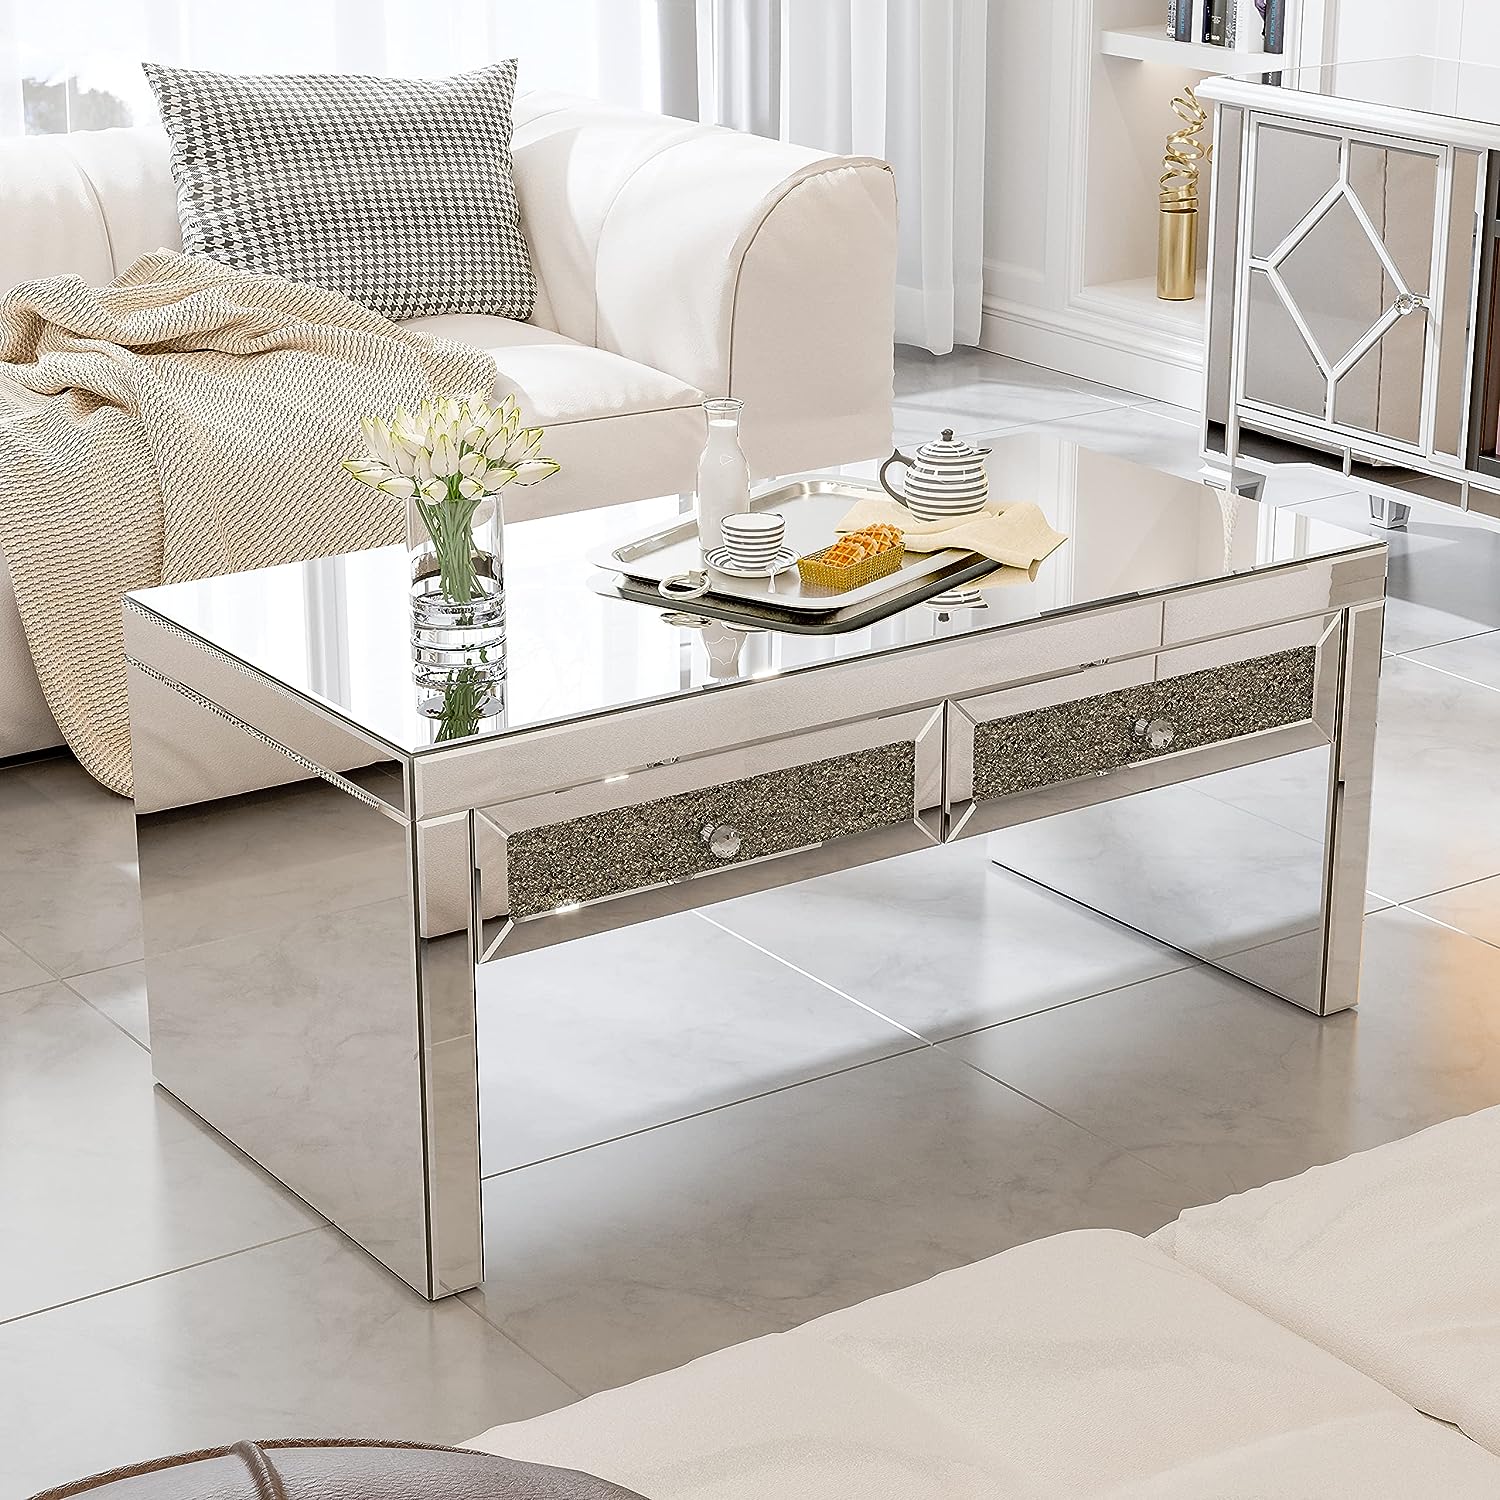 IKIFLY Mirrored Coffee Table with 2 Crystal Drawers, Glass Rectangle End Table Coffee Tea Table for Living Room Bedroom